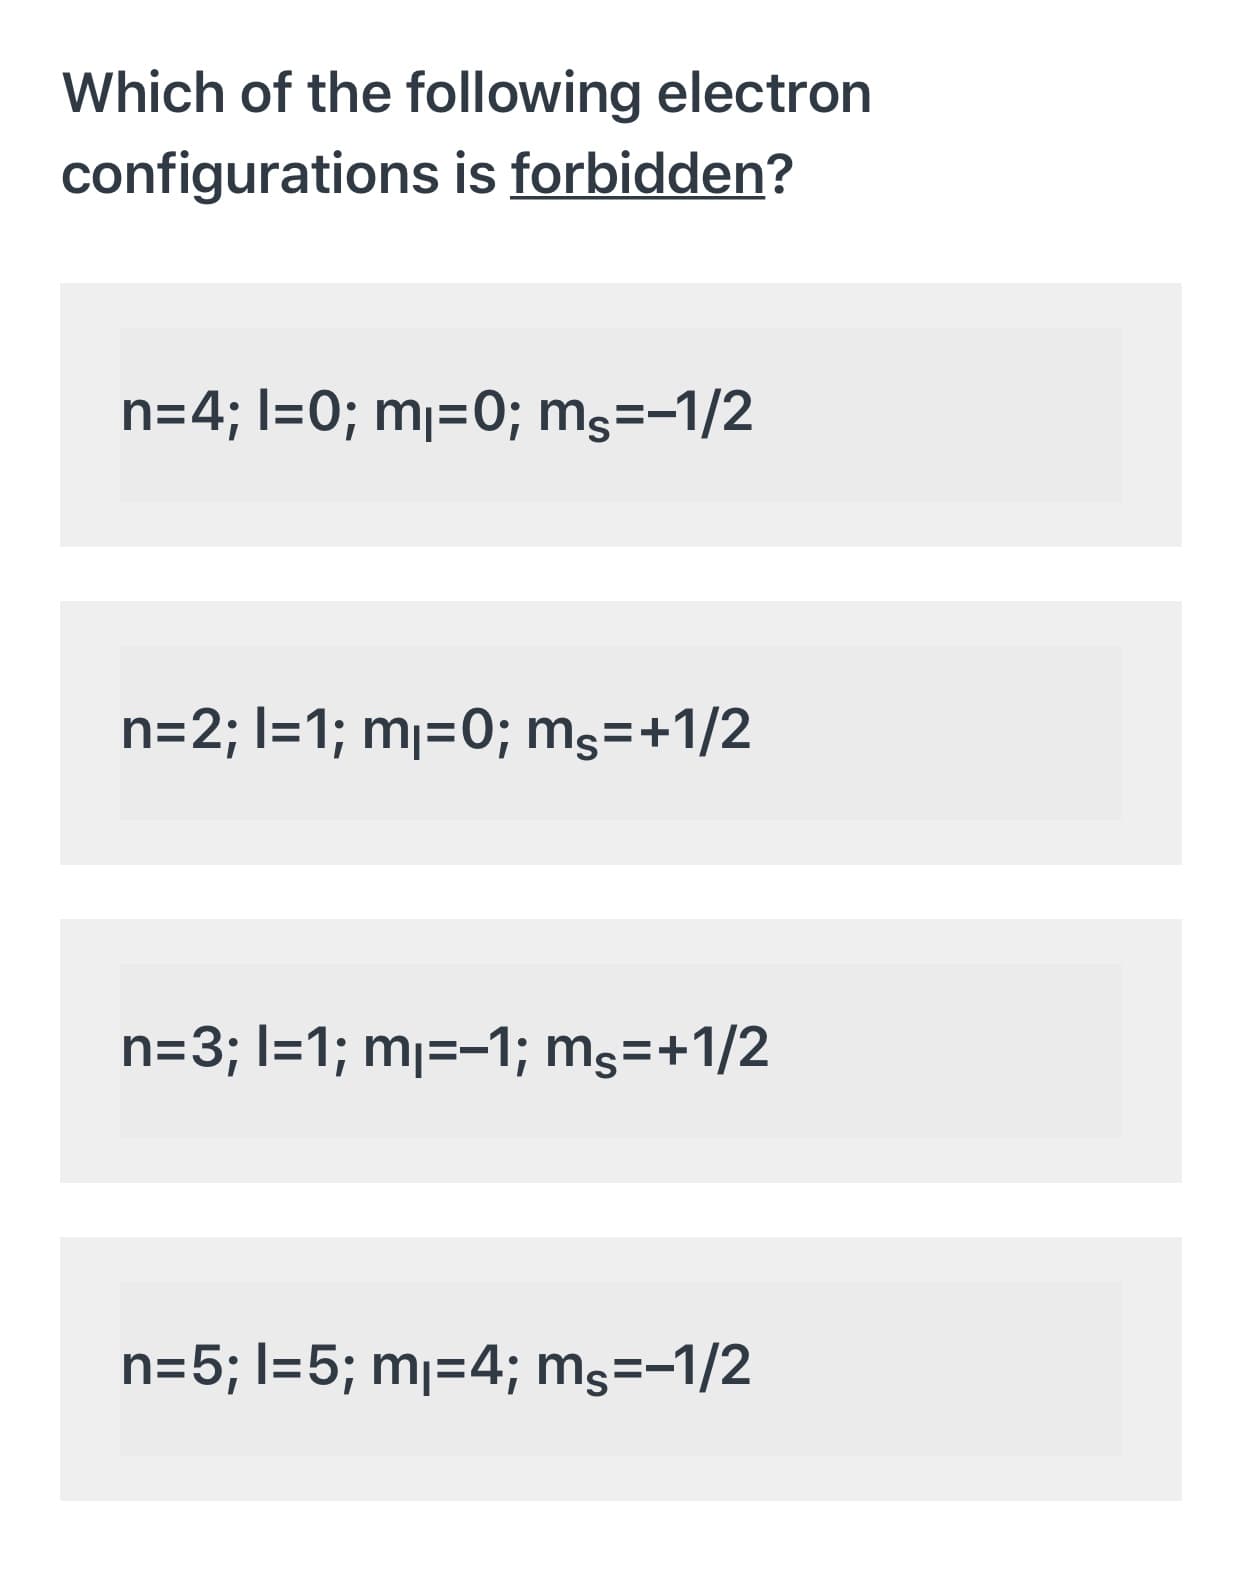 Which of the following electron
configurations is forbidden?
n=4; I=0; mj=0; mg=-1/2
n=2; I=1; mj=0; mş=+1/2
n=3; I=1; mj=-1; ms=+1/2
n=5; l=5; mj=4; mg=-1/2
